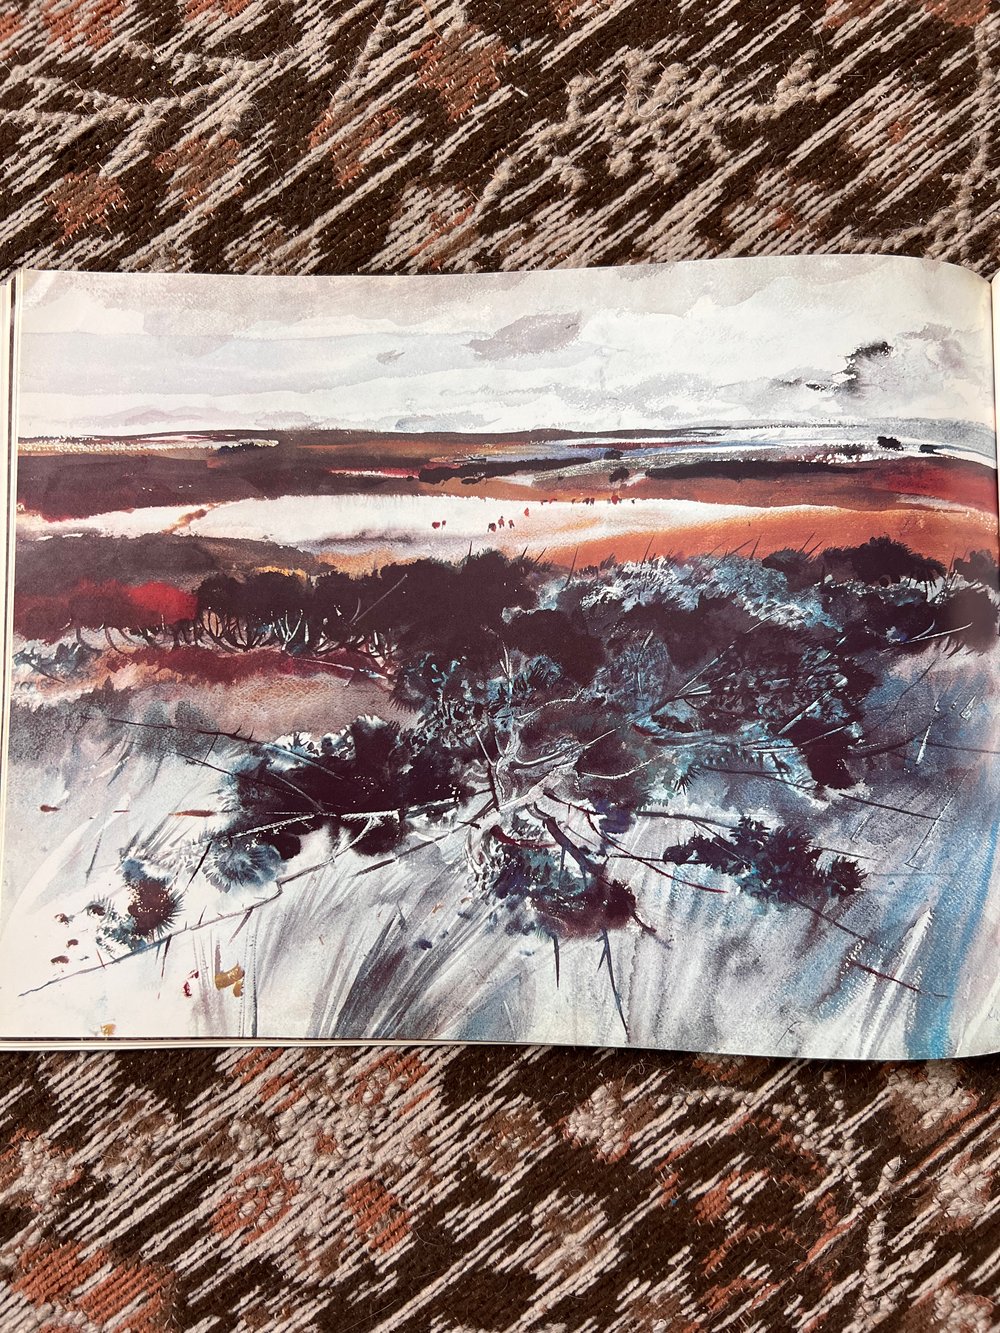 1973 The Art of Andrew Wyeth Paperback Book